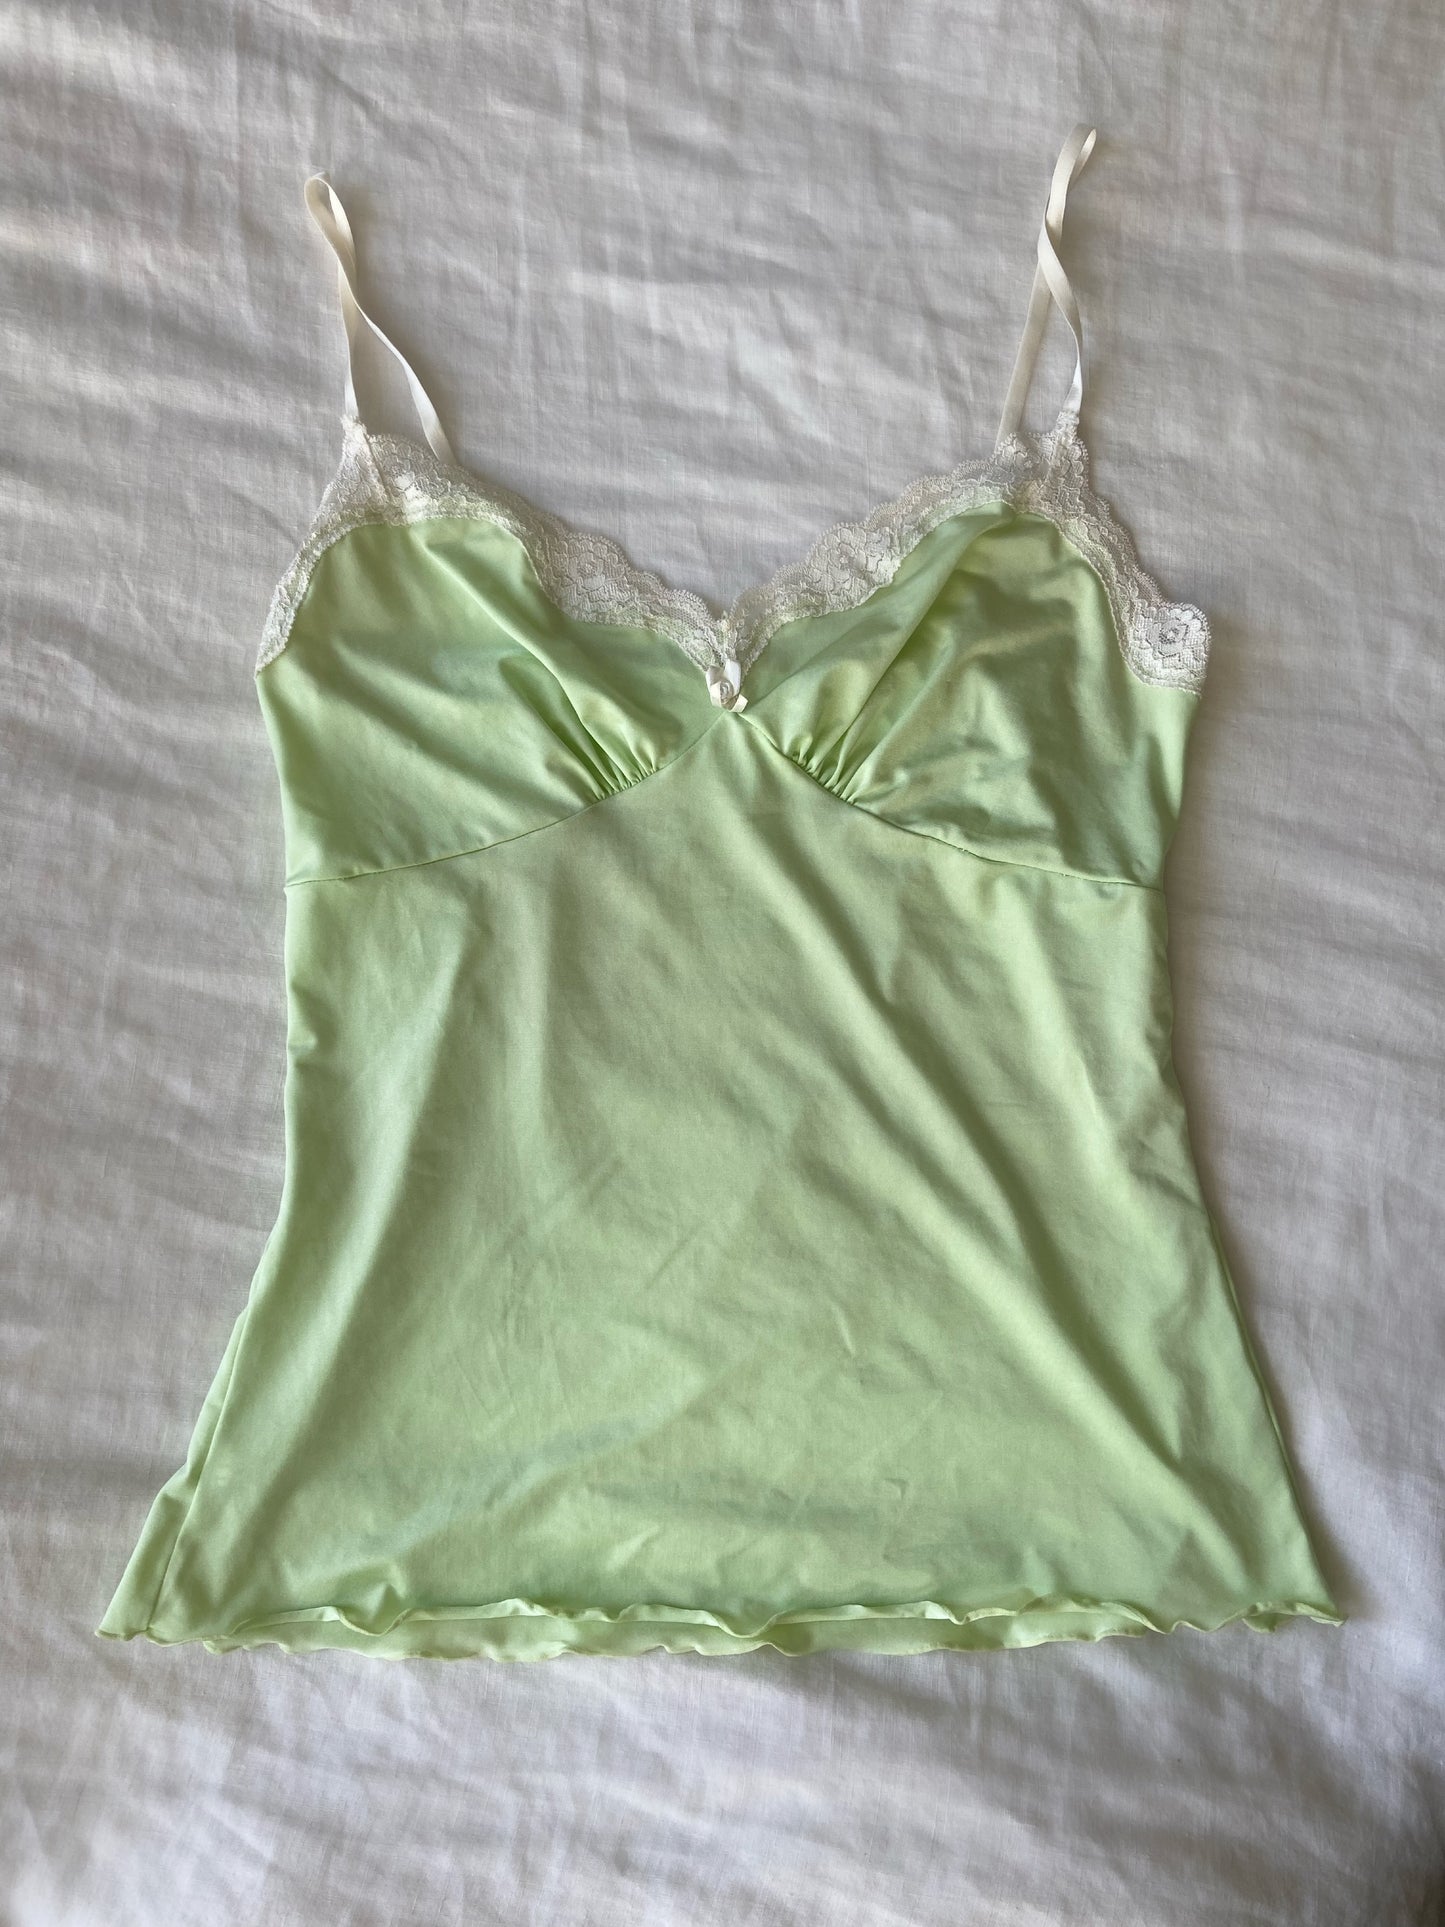 00’s Tinkerbell green lace cami | Size 10-12